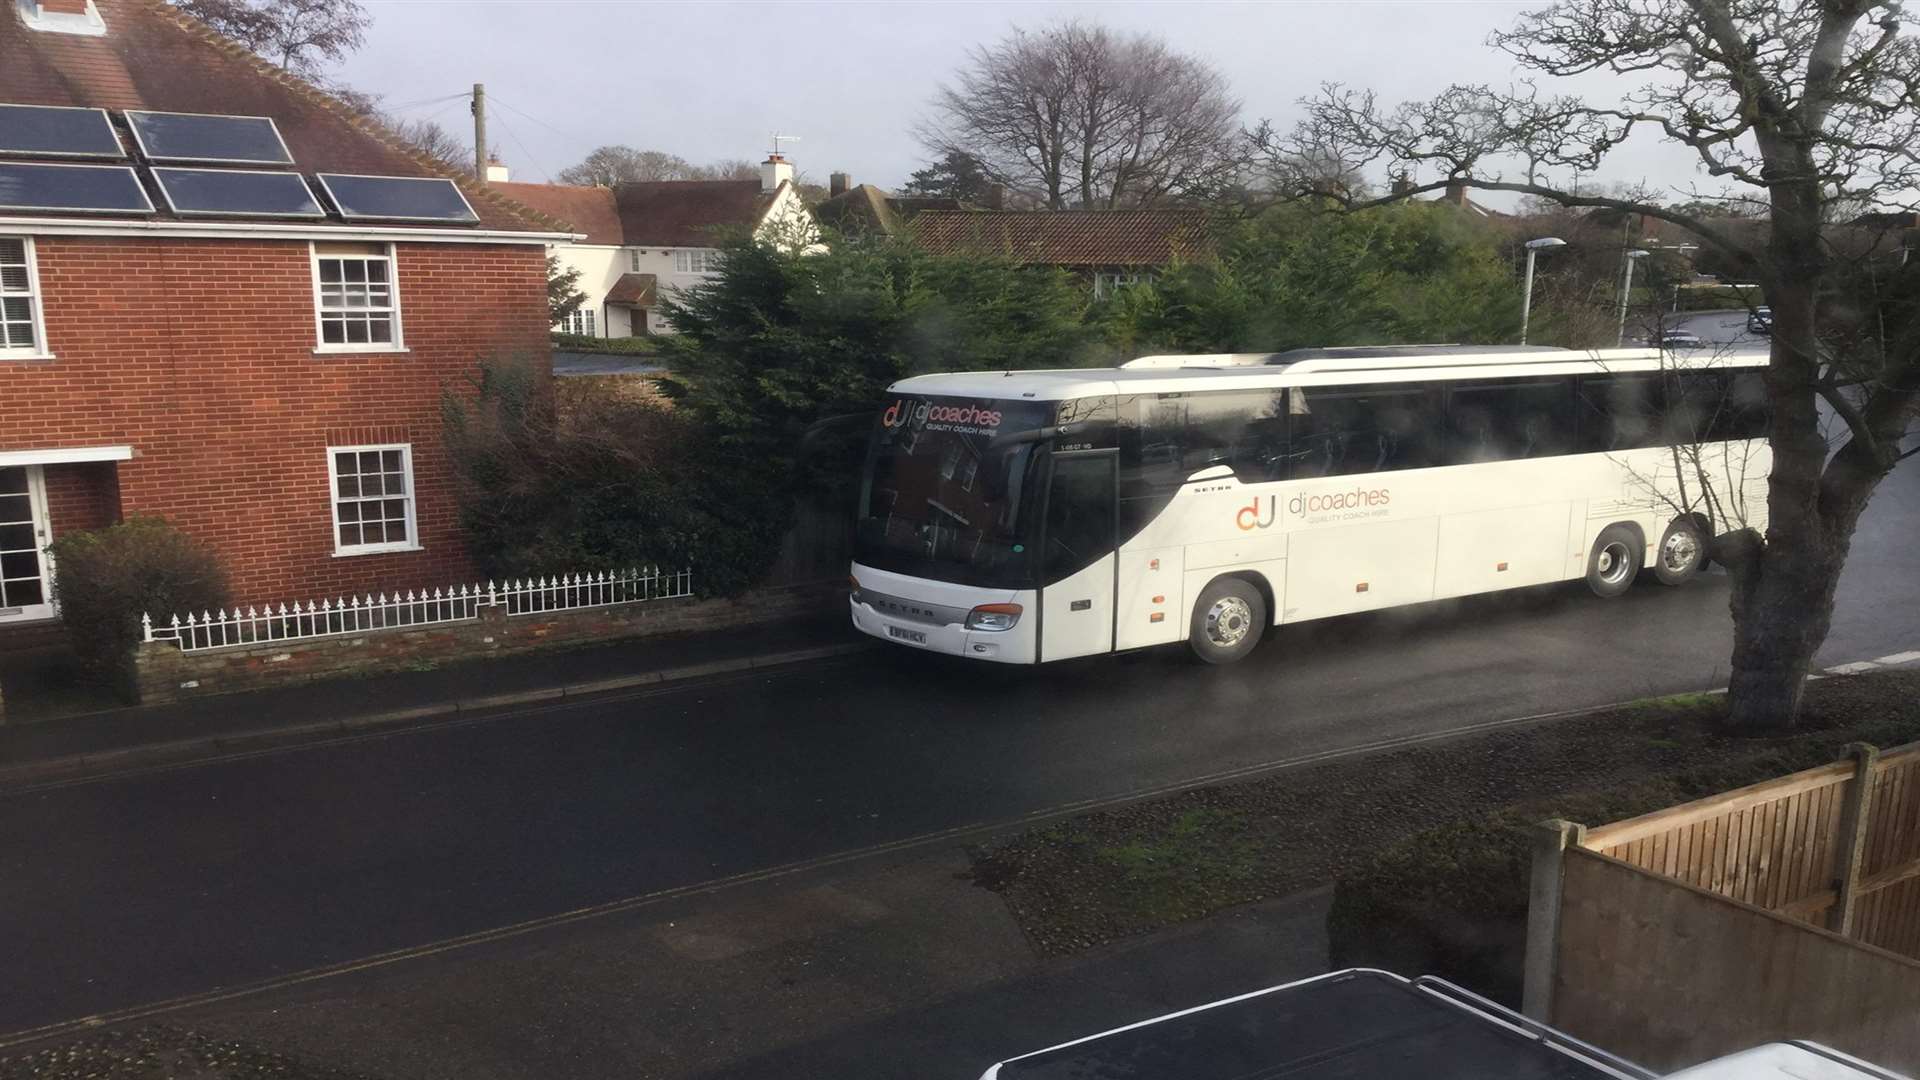 One of the buses parked in St George's Road in Sandwich